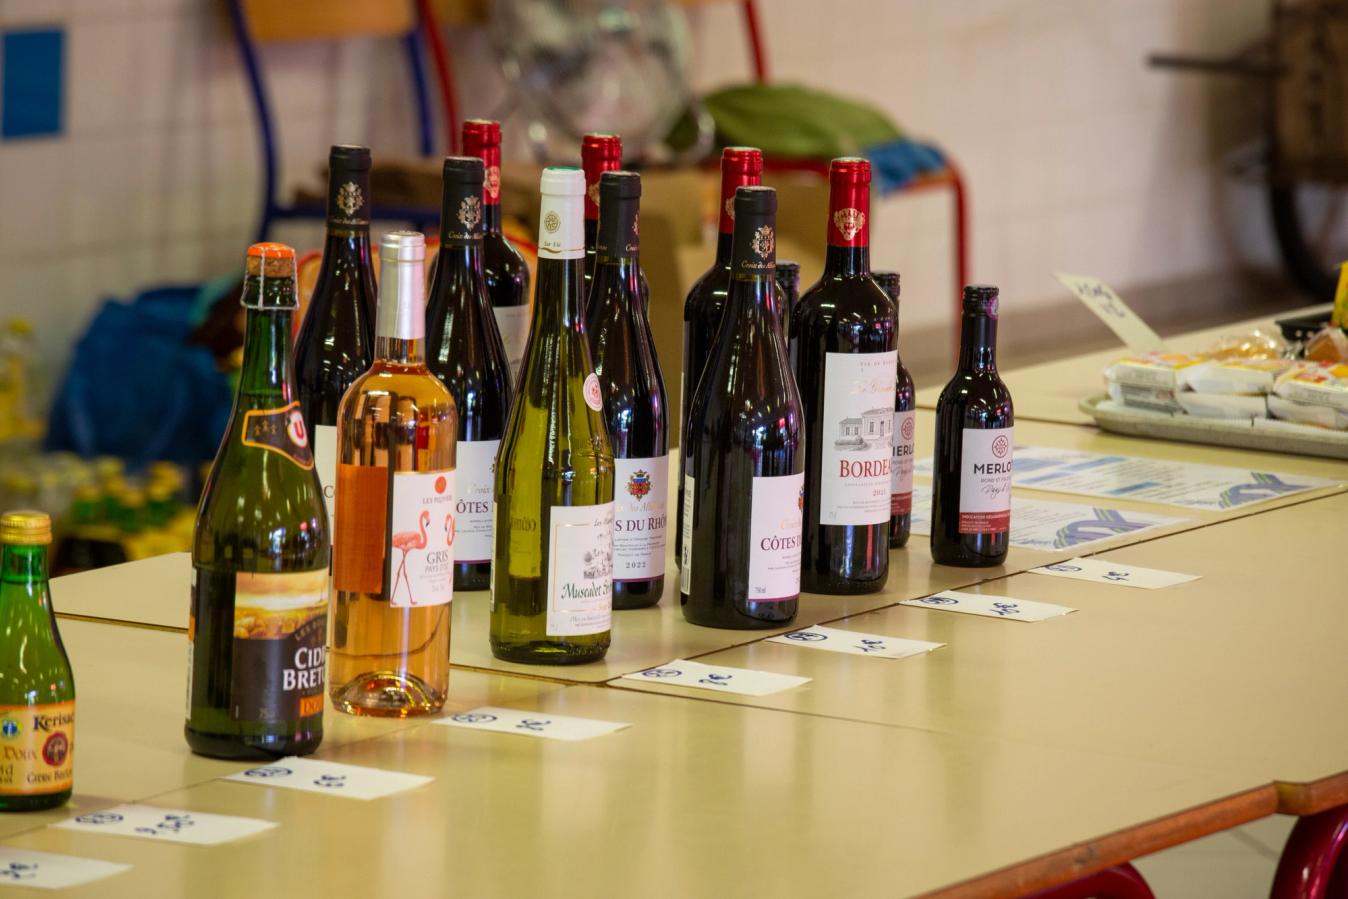 A selection of wines on offer for riders at checkpoints